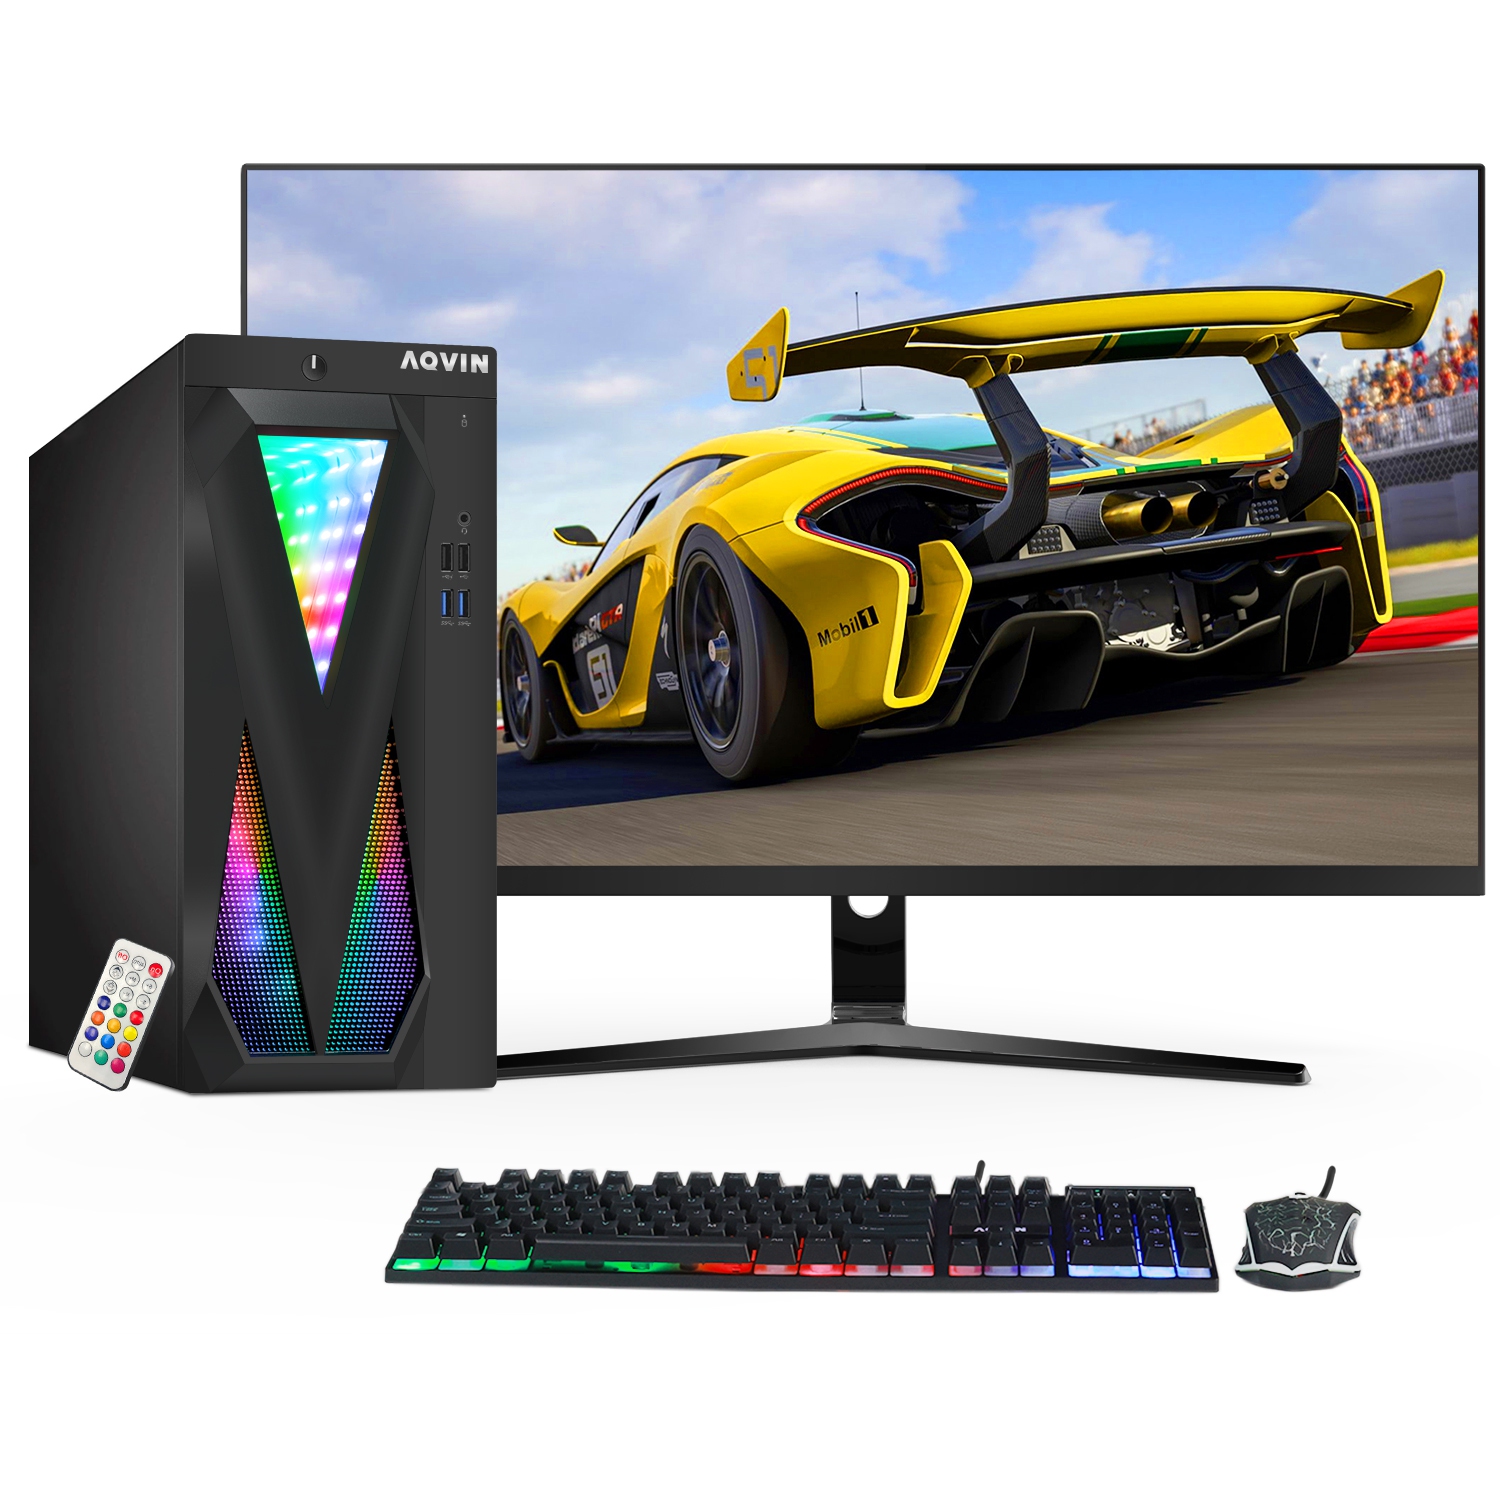 Refurbished (Excellent) - AQVIN InfinityLite Gaming PC Combo Desktop Computer New 27inch Curved Monitor Intel Core i5 Processor 32GB RAM 2TB SSD AMD RX 550 DDR5 HDMI Windows 11 Pro